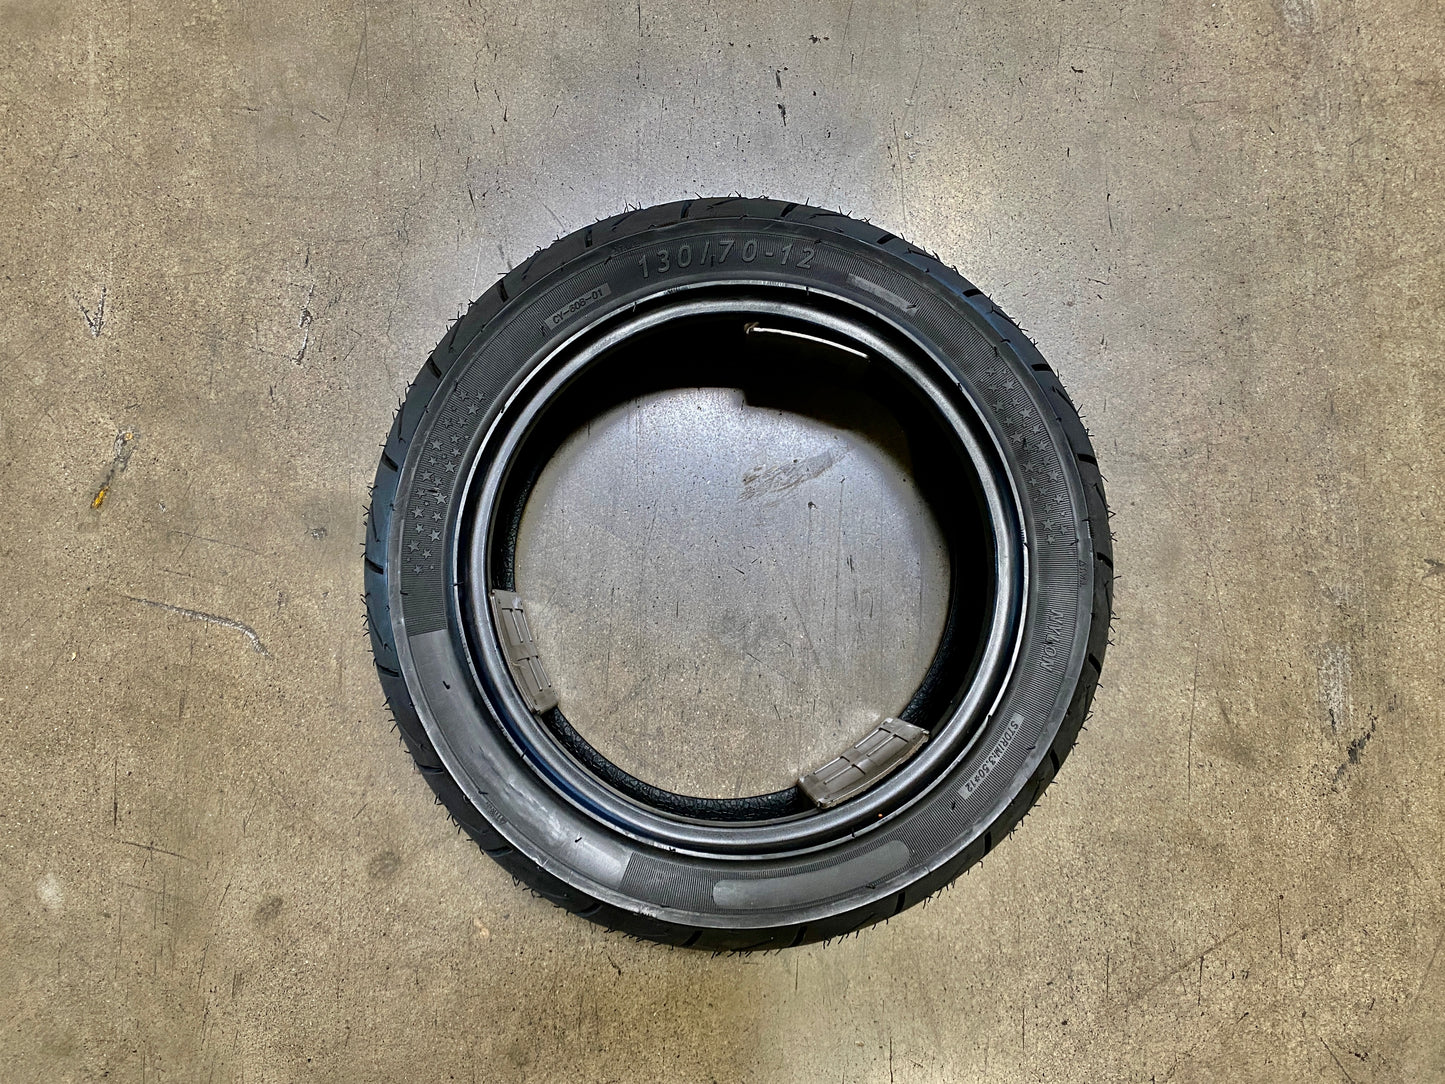 130/70-12 tire for sale BD125-10